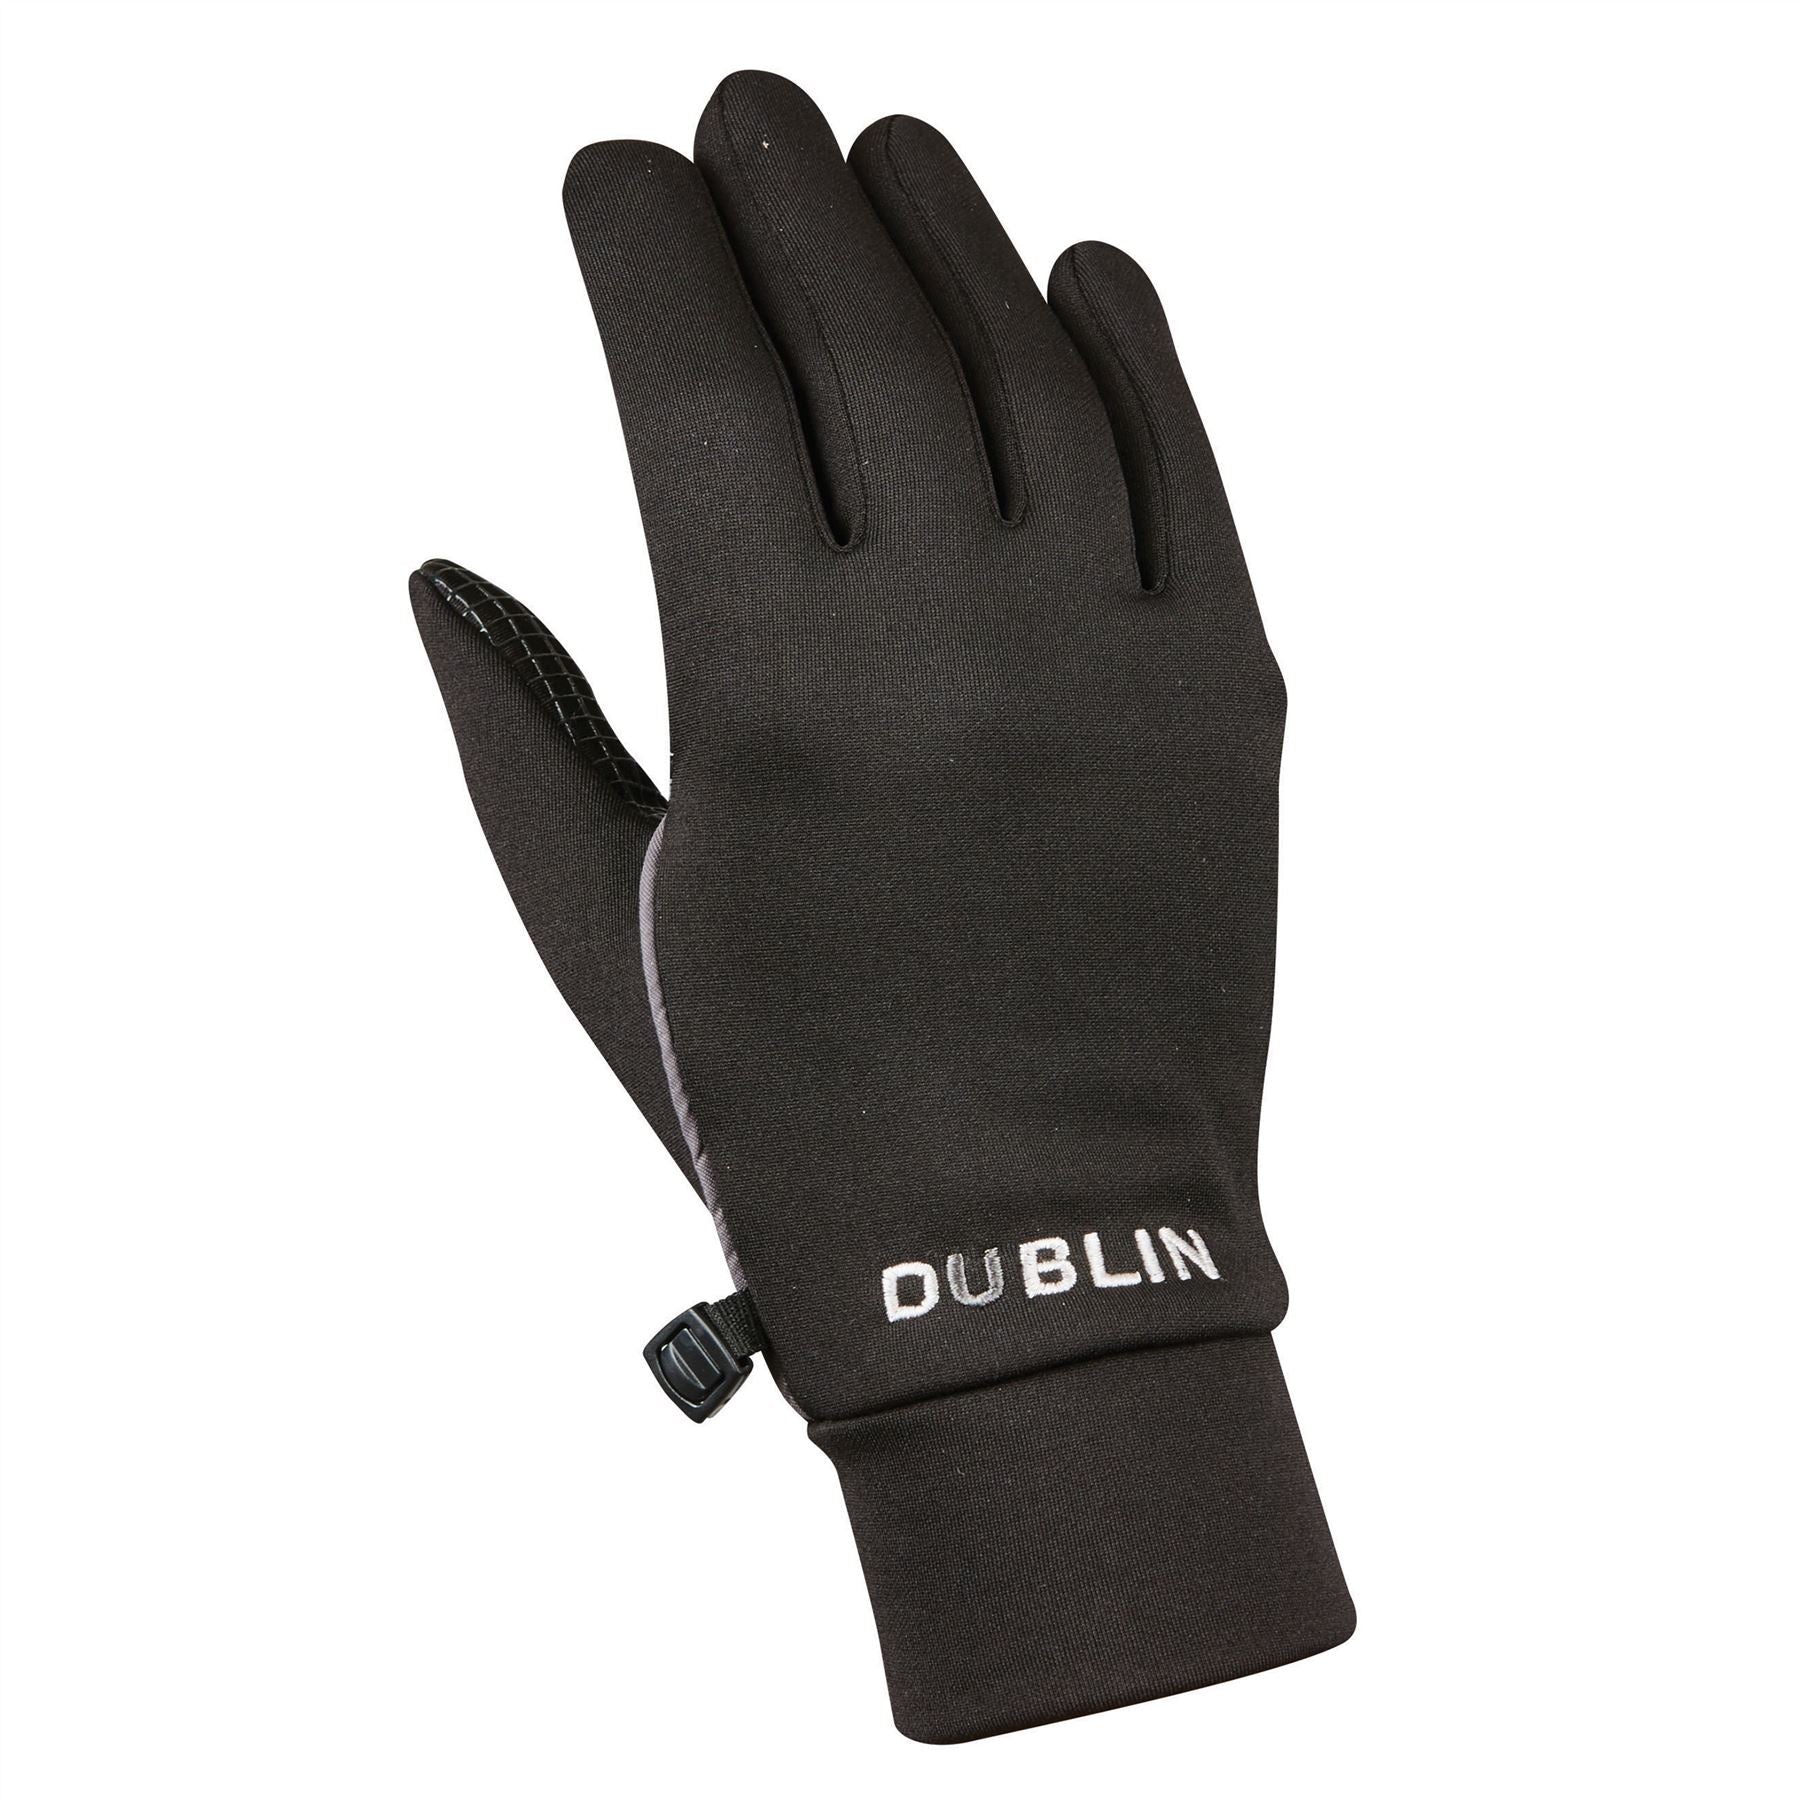 Dublin Thermal Horse Riding Gloves - Just Horse Riders